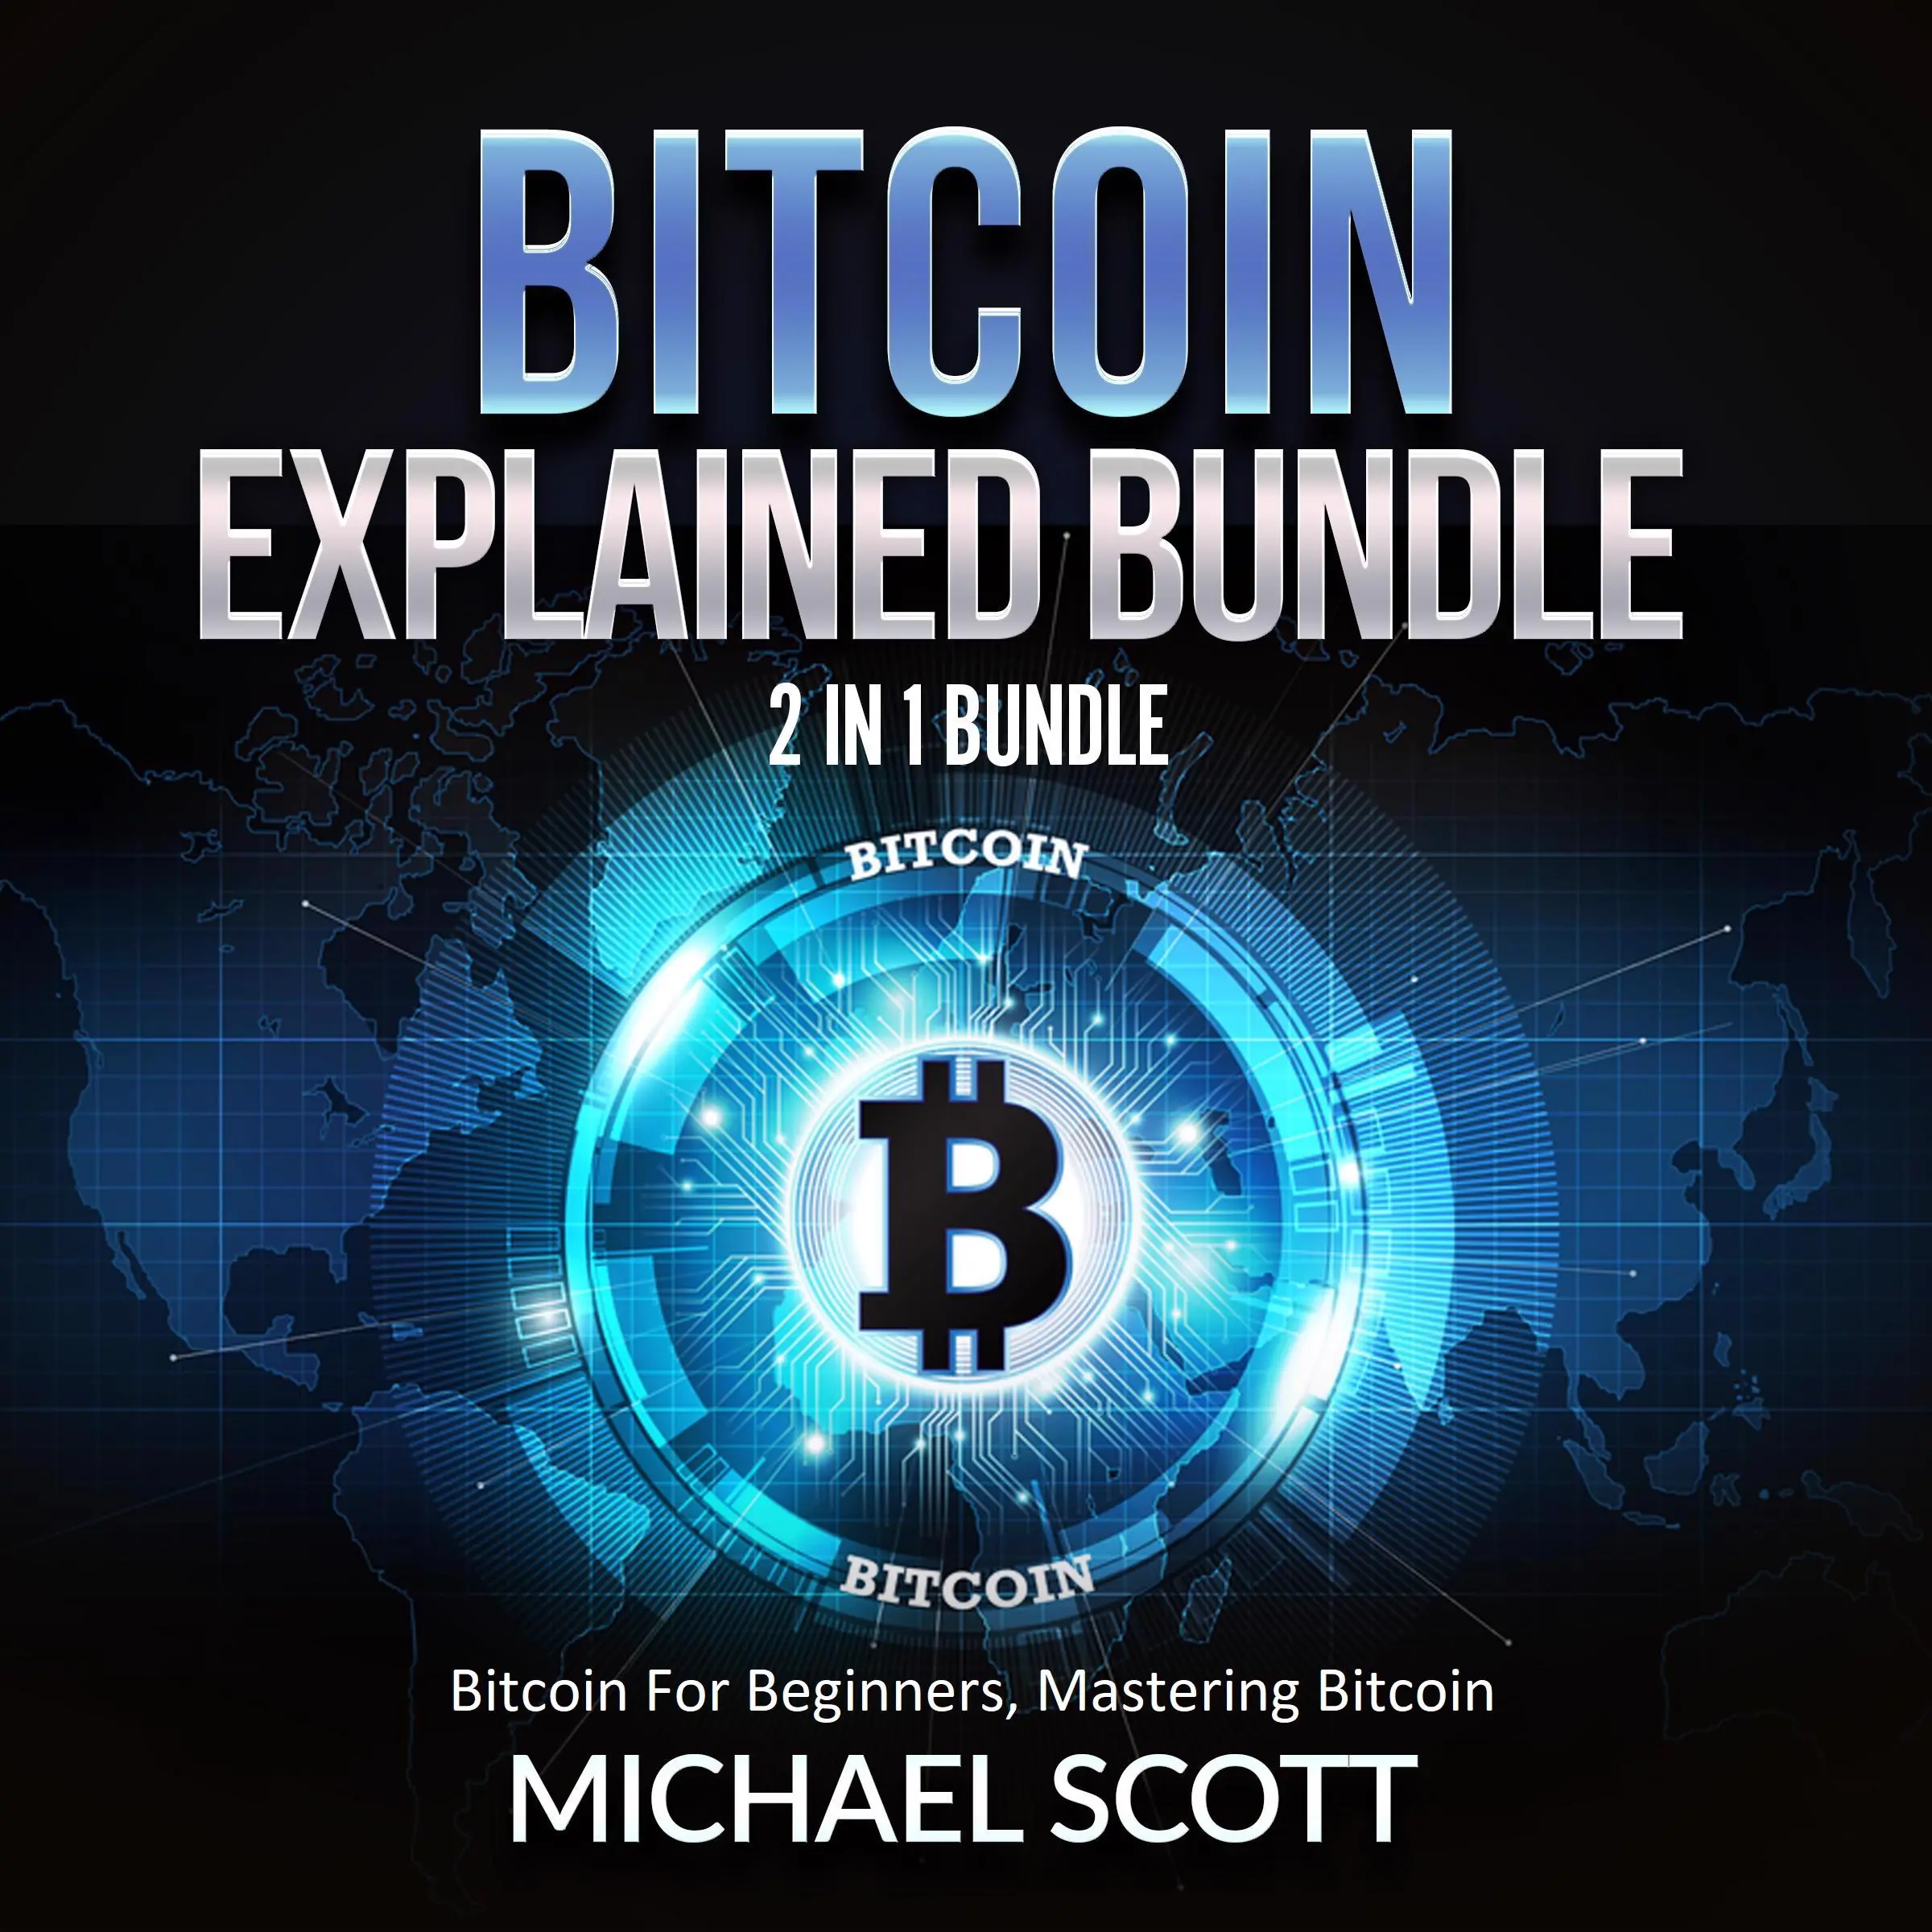 Bitcoin Explained Bundle: 2 in 1 Bundle, Bitcoin For Beginners, Mastering Bitcoin by Michael Scott Audiobook